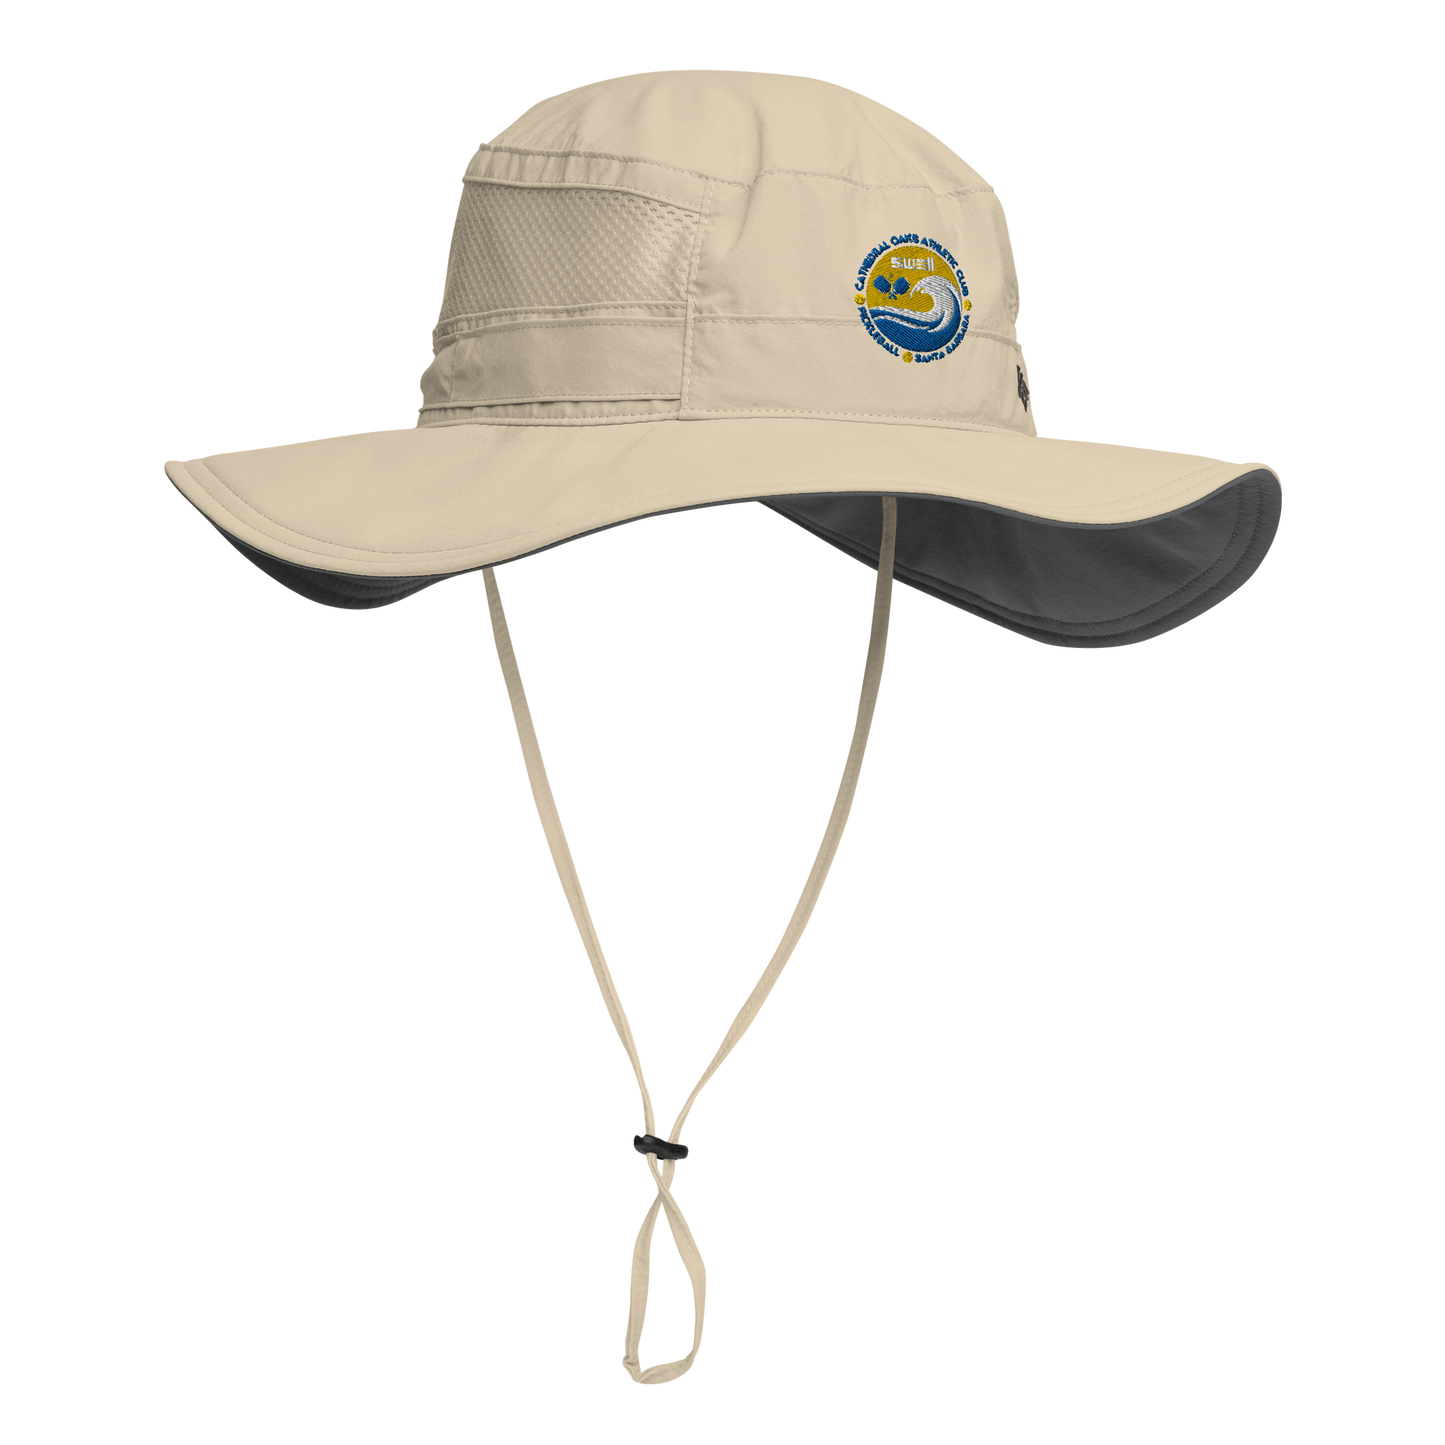 SWELL Pickleball Embroidered Columbia booney hat